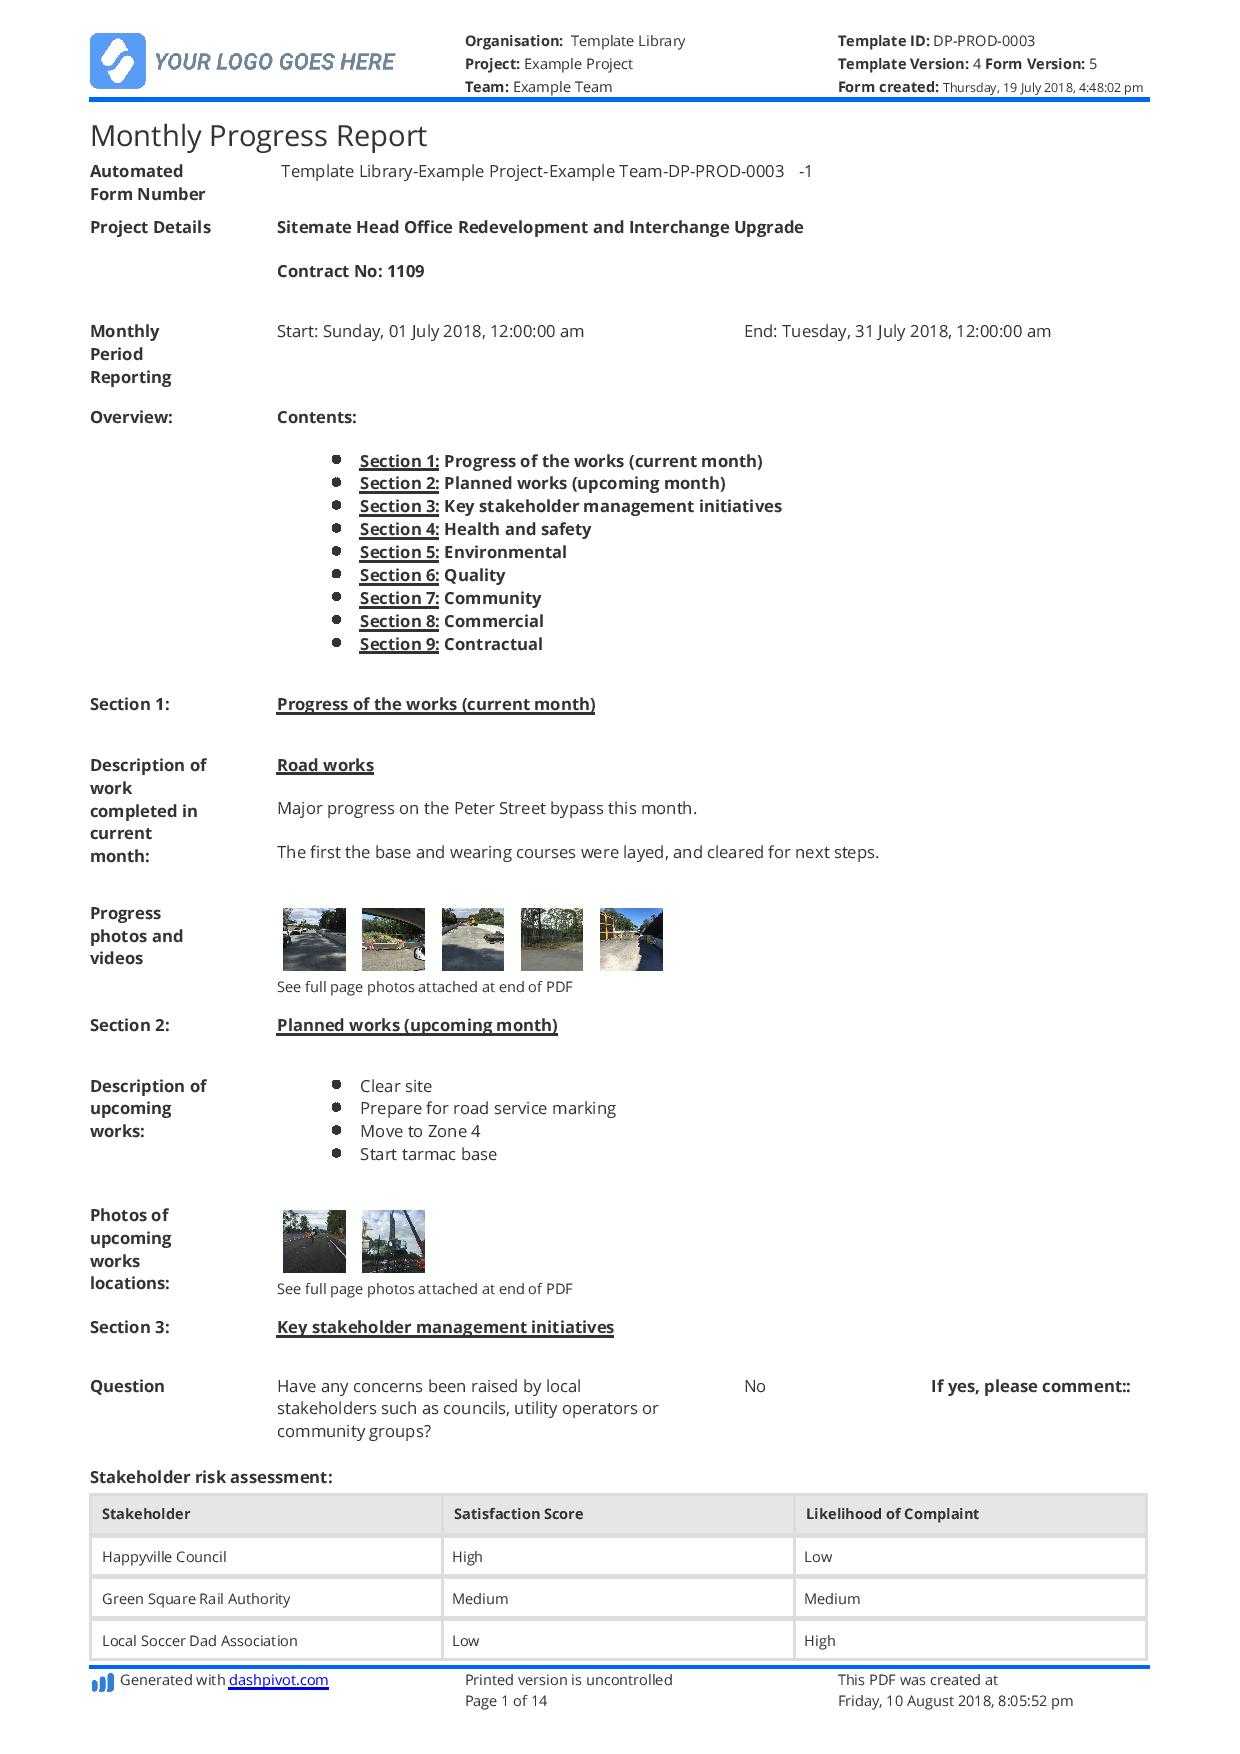 Monthly Construction Progress Report Template: Use This Intended For Progress Report Template For Construction Project